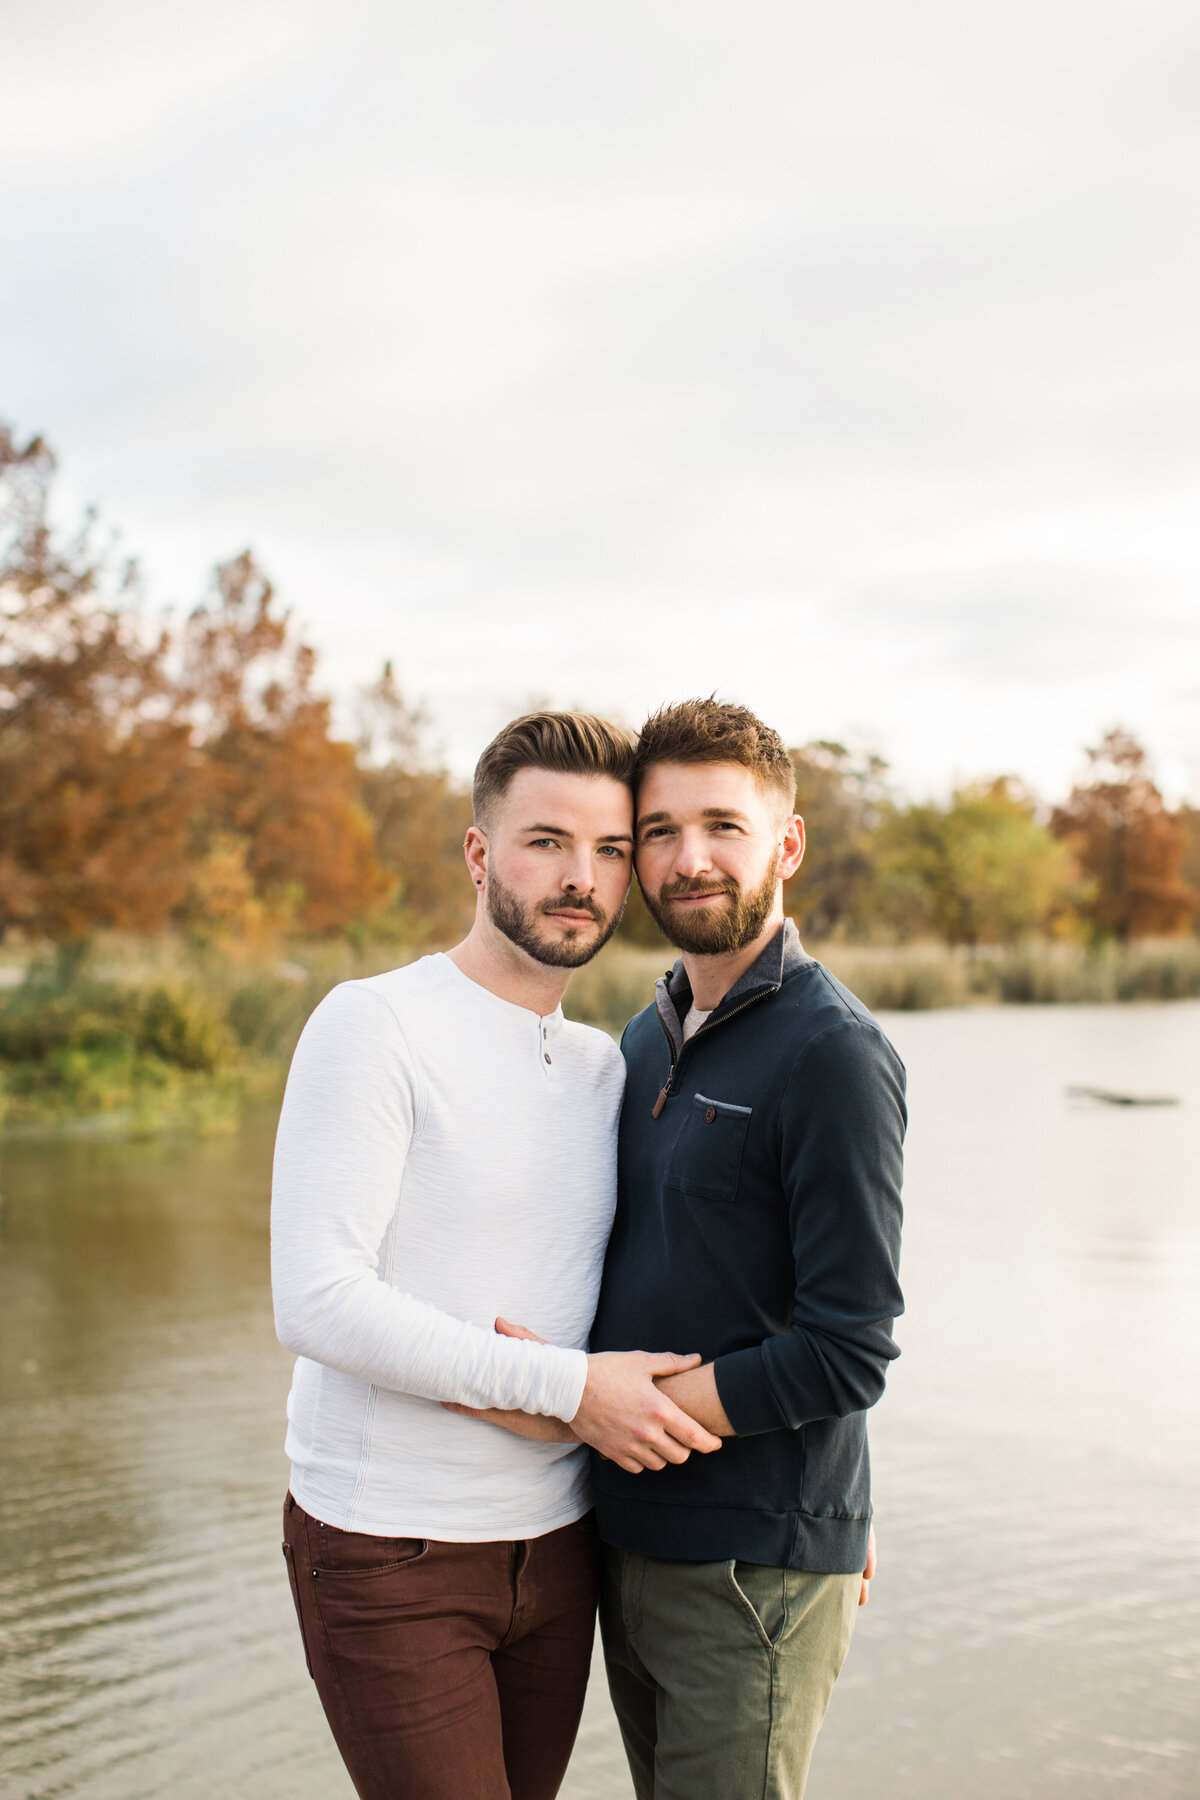 A gay couple holding each other close in front of a pond and a wooded background during their outdoor engagement session in Dallas, Texas. The man on the right is wearing a navy jacket with green pants while the man on the left is wearing a long-sleeve white shirt with brown pants.